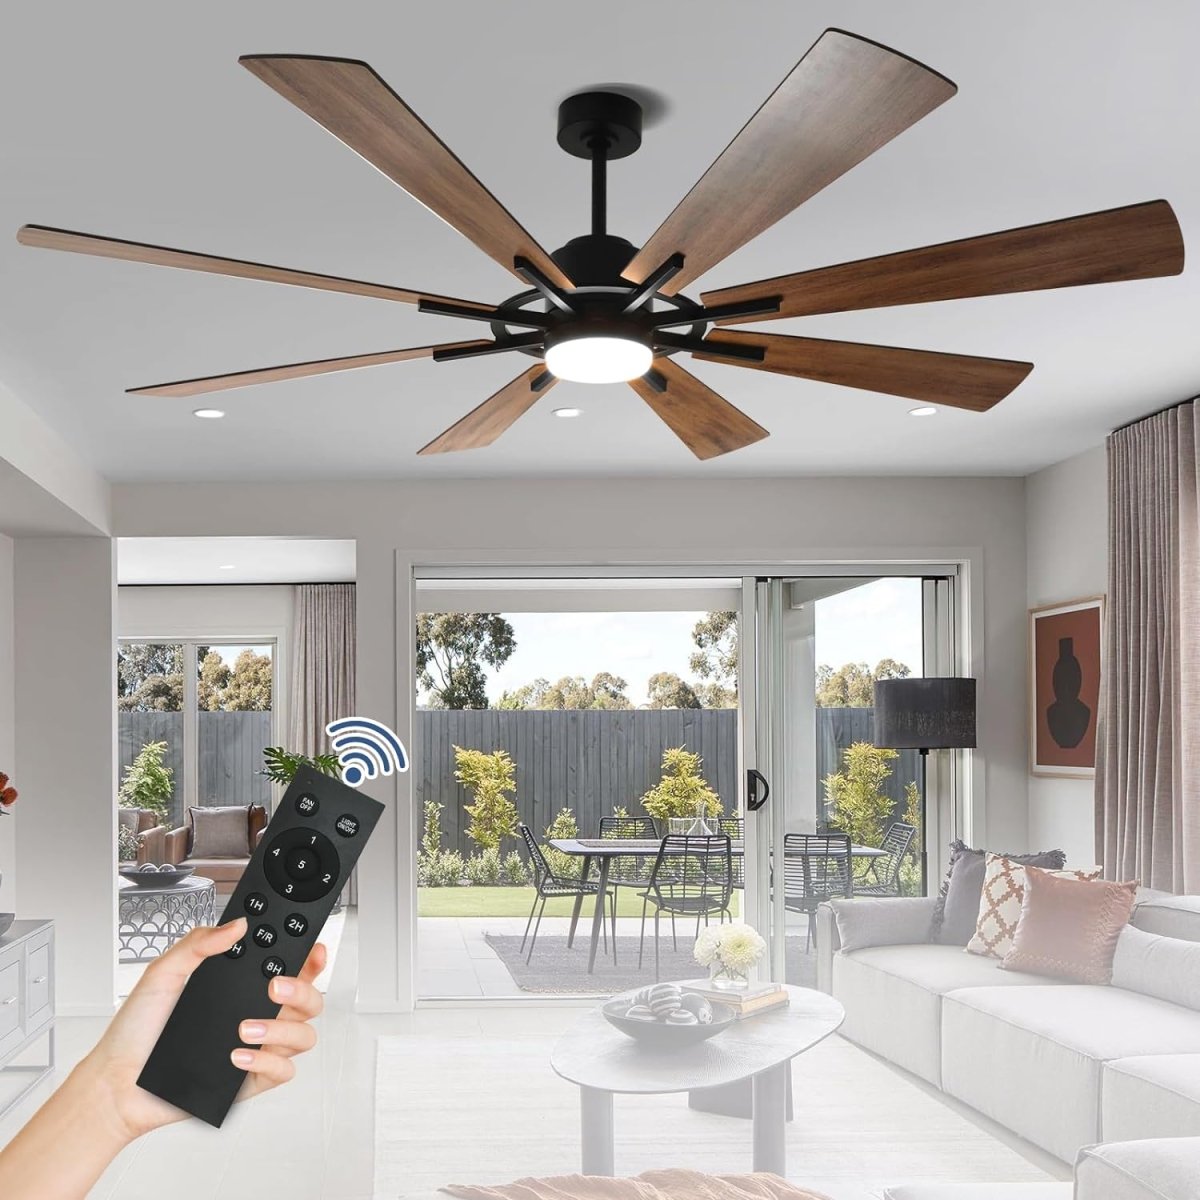 Depuley 72" DC Ceiling Fan with Lights Remote Control, Large Modern Black LED Ceiling Fans, 3-Color Reversible 8 Blades 5 Speed Quiet Motor for Living Room, Patio Hall, Office & Covered Outdoor, Timer - WS-FPZ45-18C-BR 2 | DEPULEY